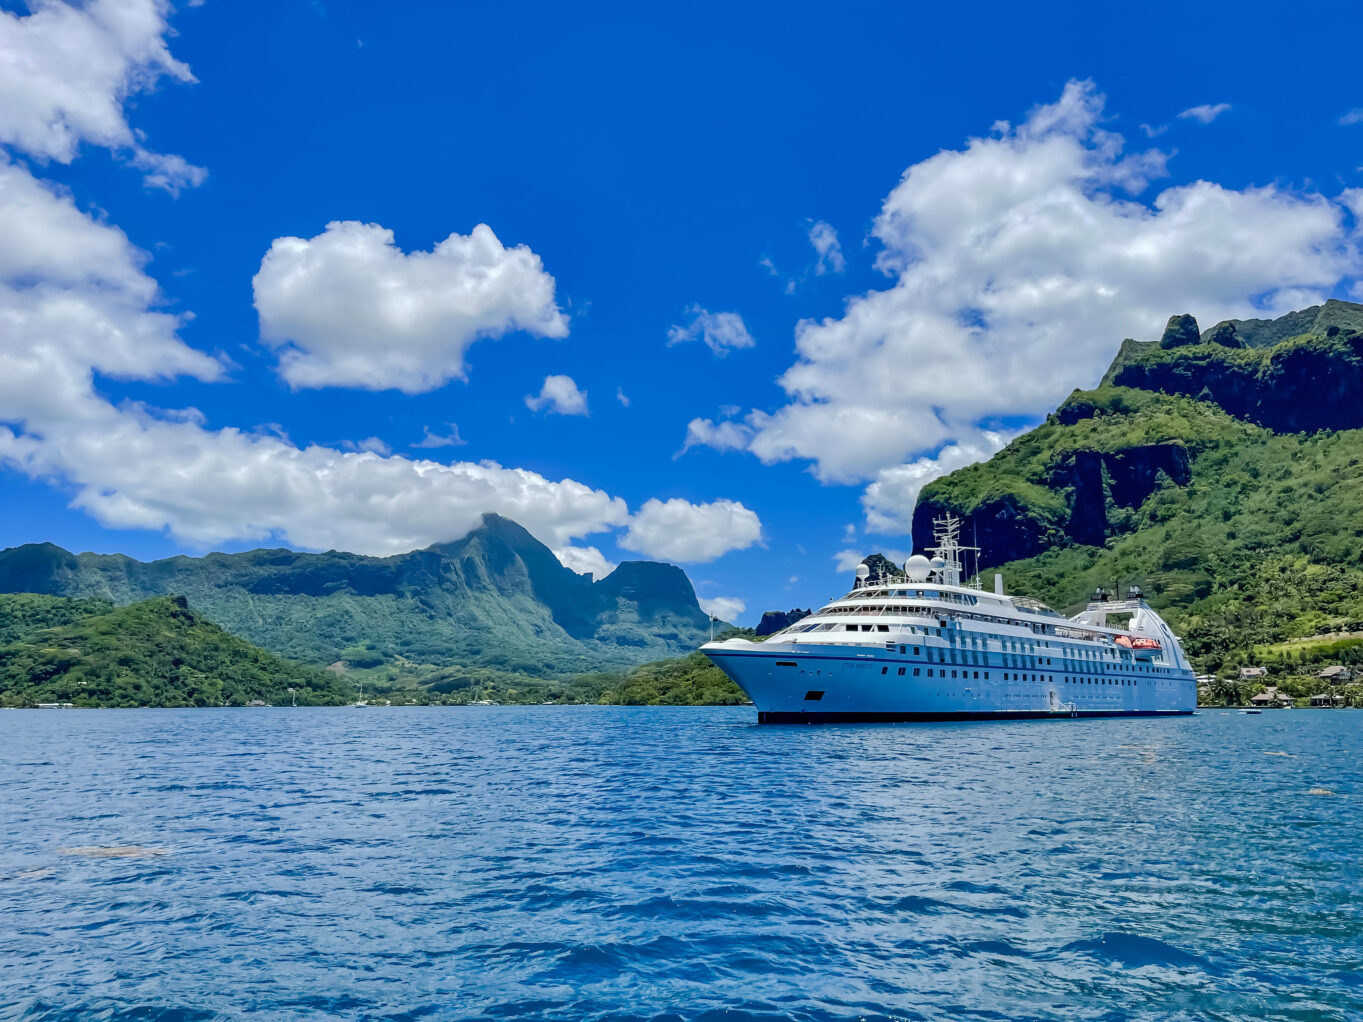 Windstar Star Breeze heads to South Pacific in preparation for the ocean cruise season. 